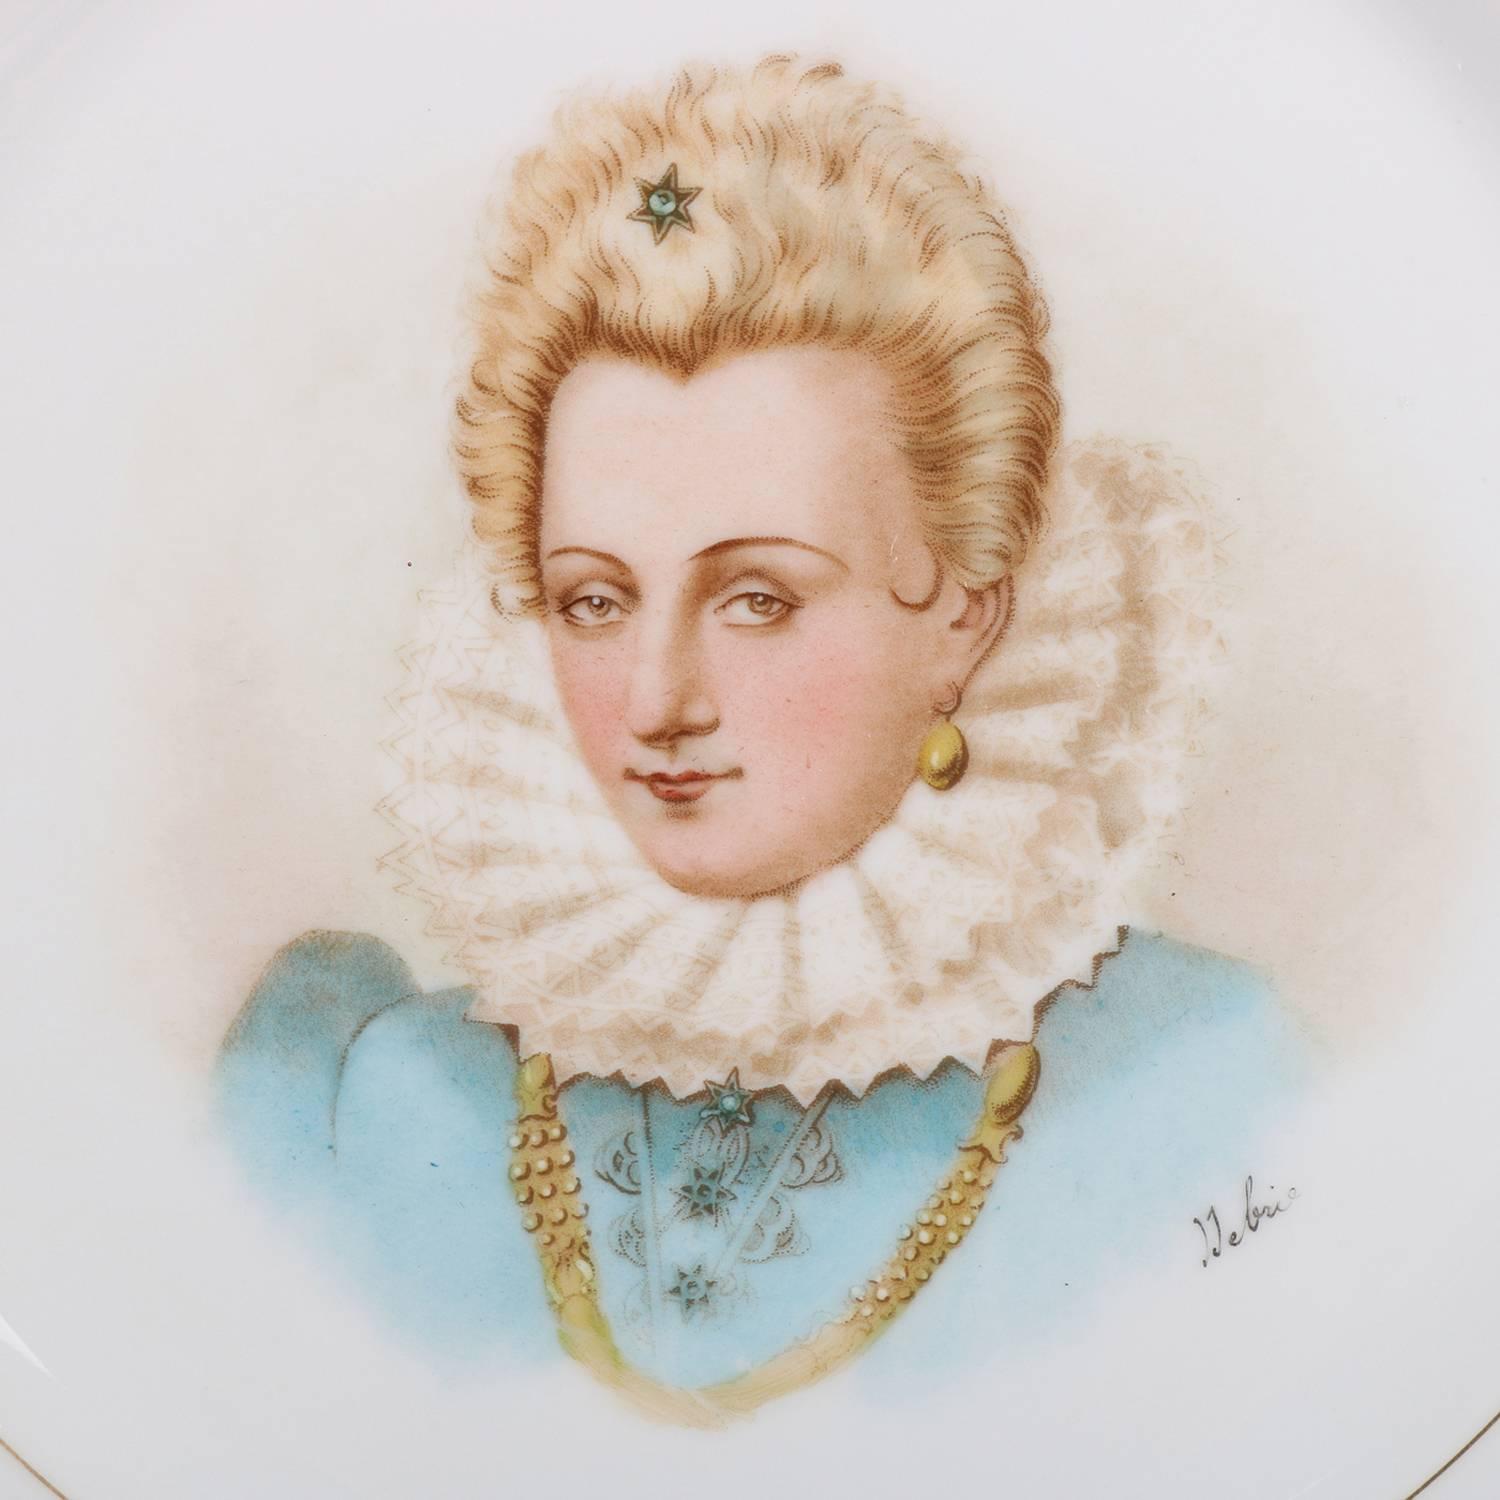 Antique French portrait plate by Sevres for Chateau de St Cloud features well with central artist signed portrait of Gabrielle D'estrees by Debrie, rim with gilt scalloped edges and decorated with blue and gilt foliate motif, en verso stamped